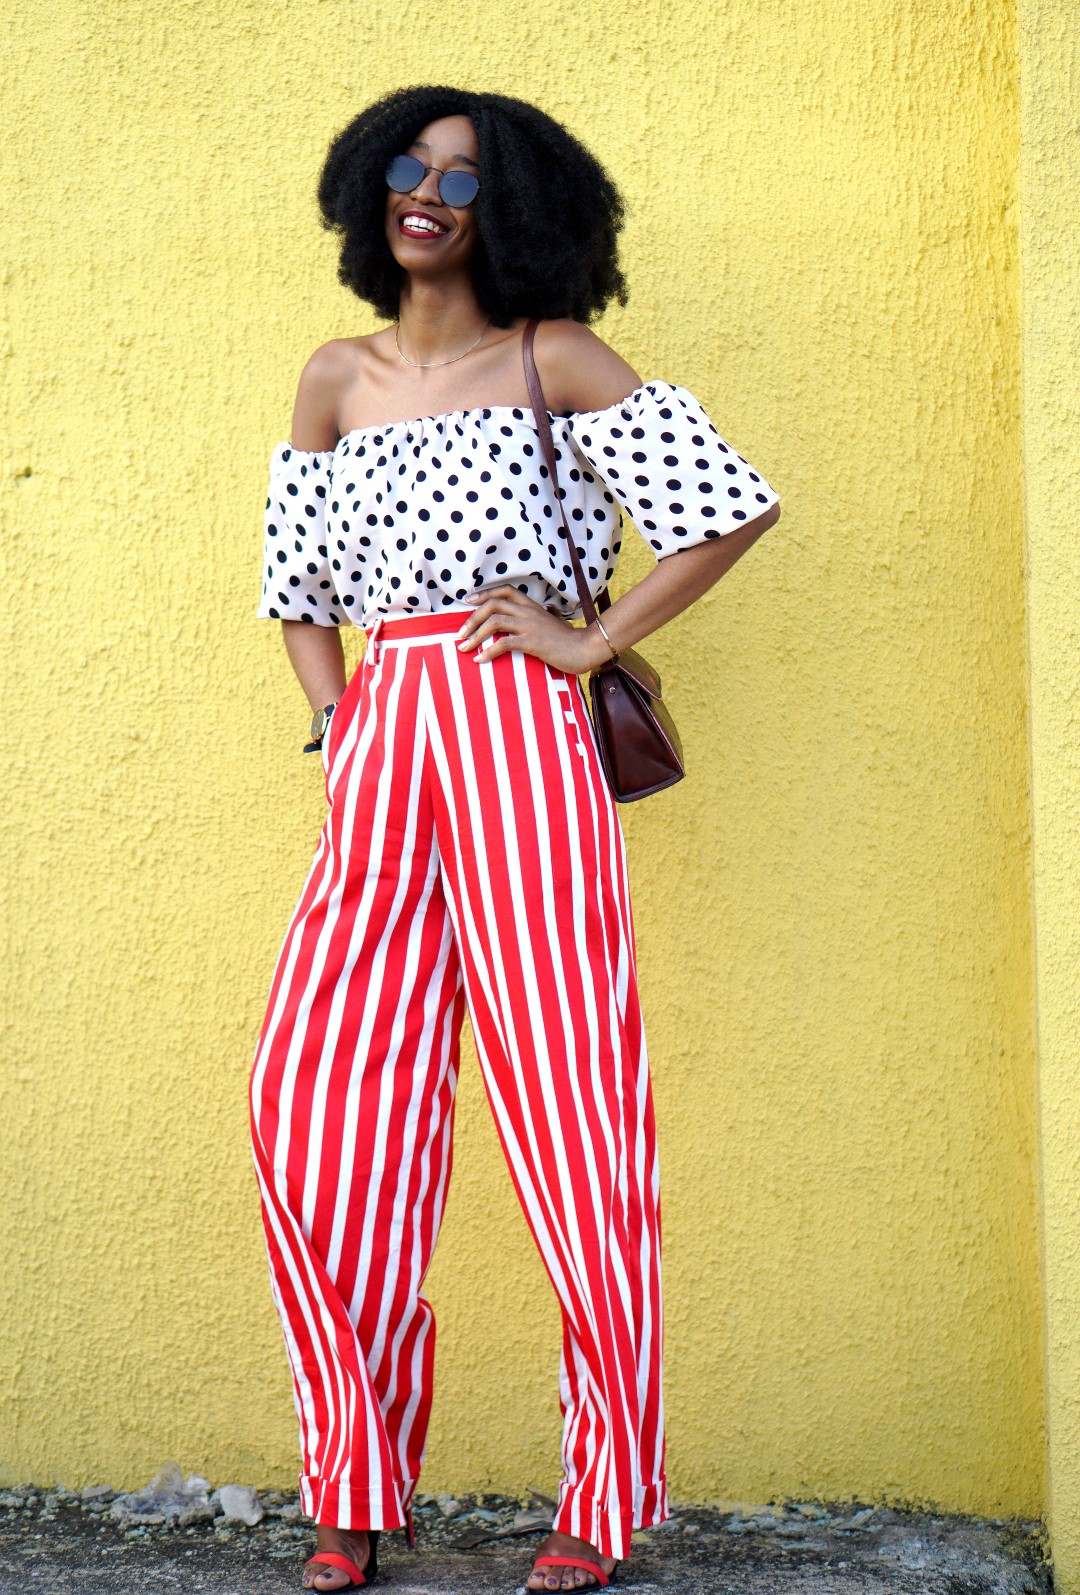 Mixed prints fashion trend : Nigerian fashion blogger Cassie Daves In a polka dot off shoulder top and striped pants and sunglasses